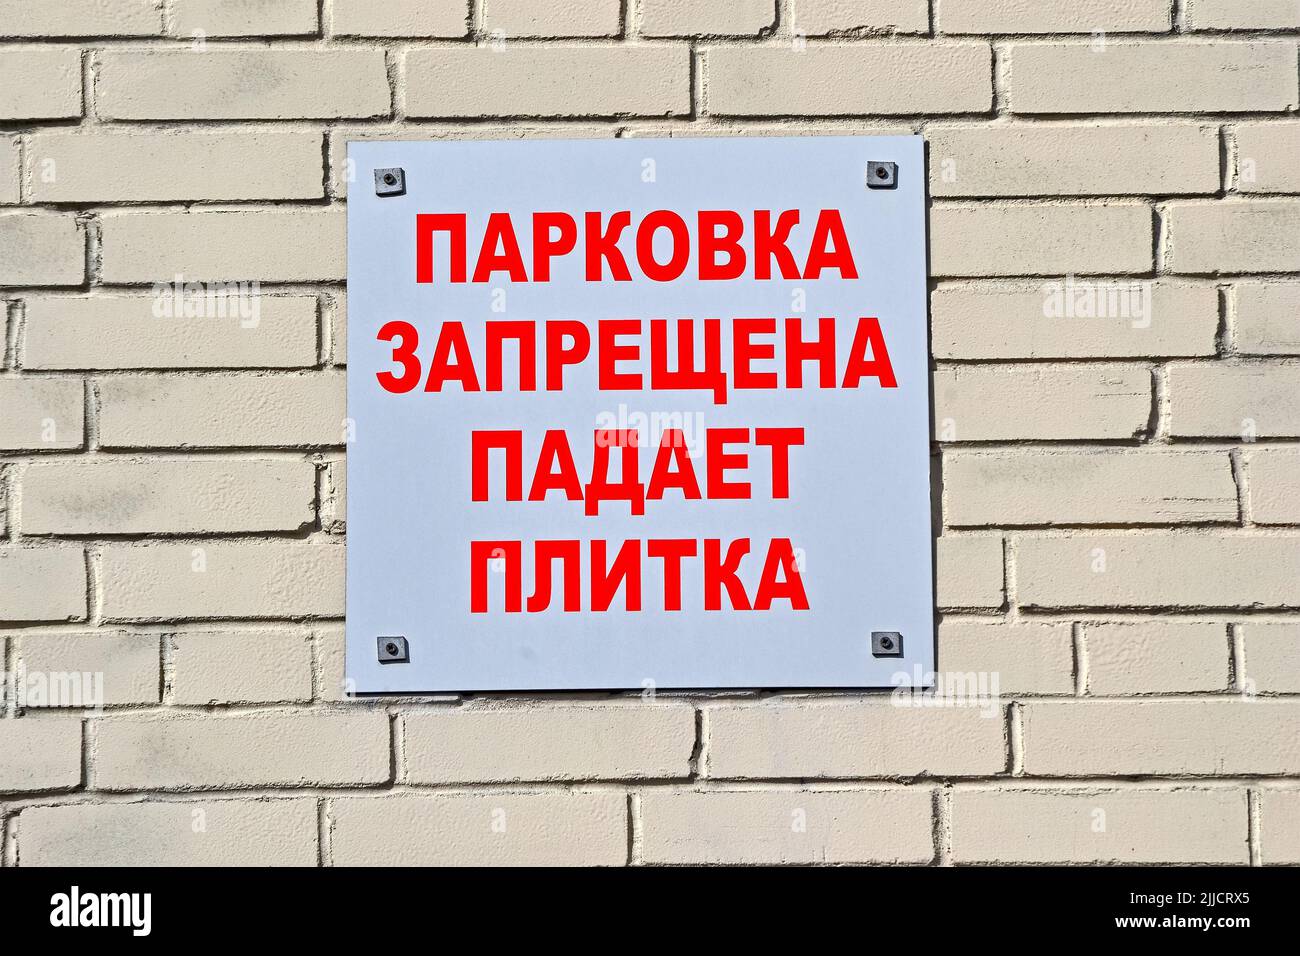 parking prohibited. falling tiles as red text message on russian language on the brick wall, security warning diversity Stock Photo